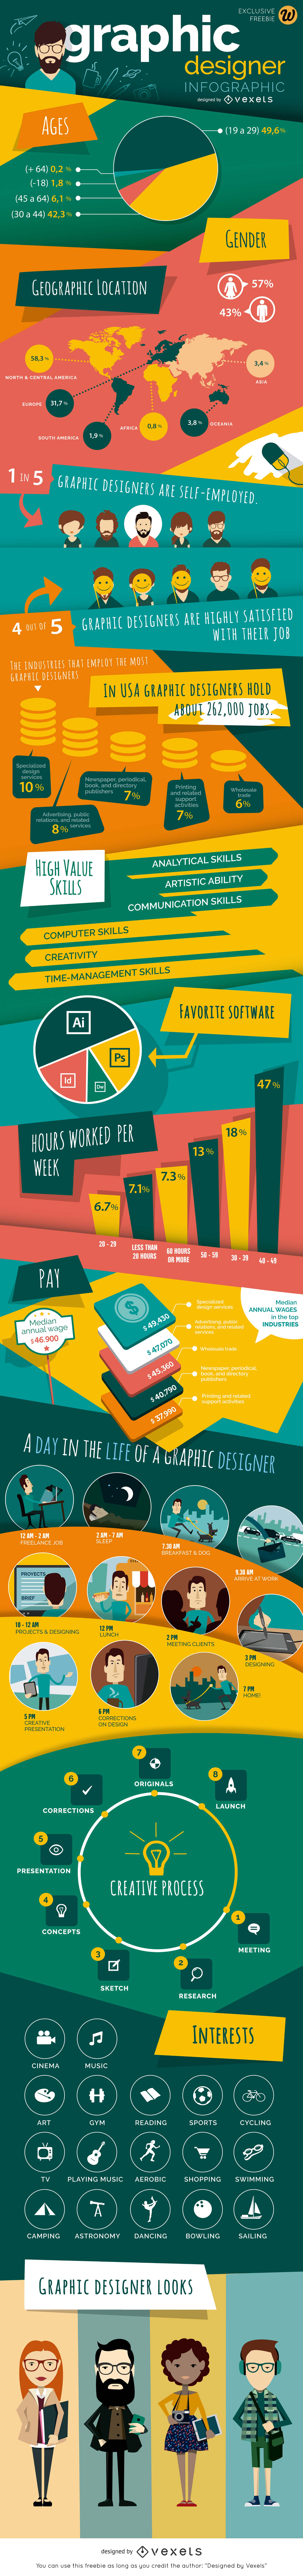 infographic-whats-a-graphic-designer